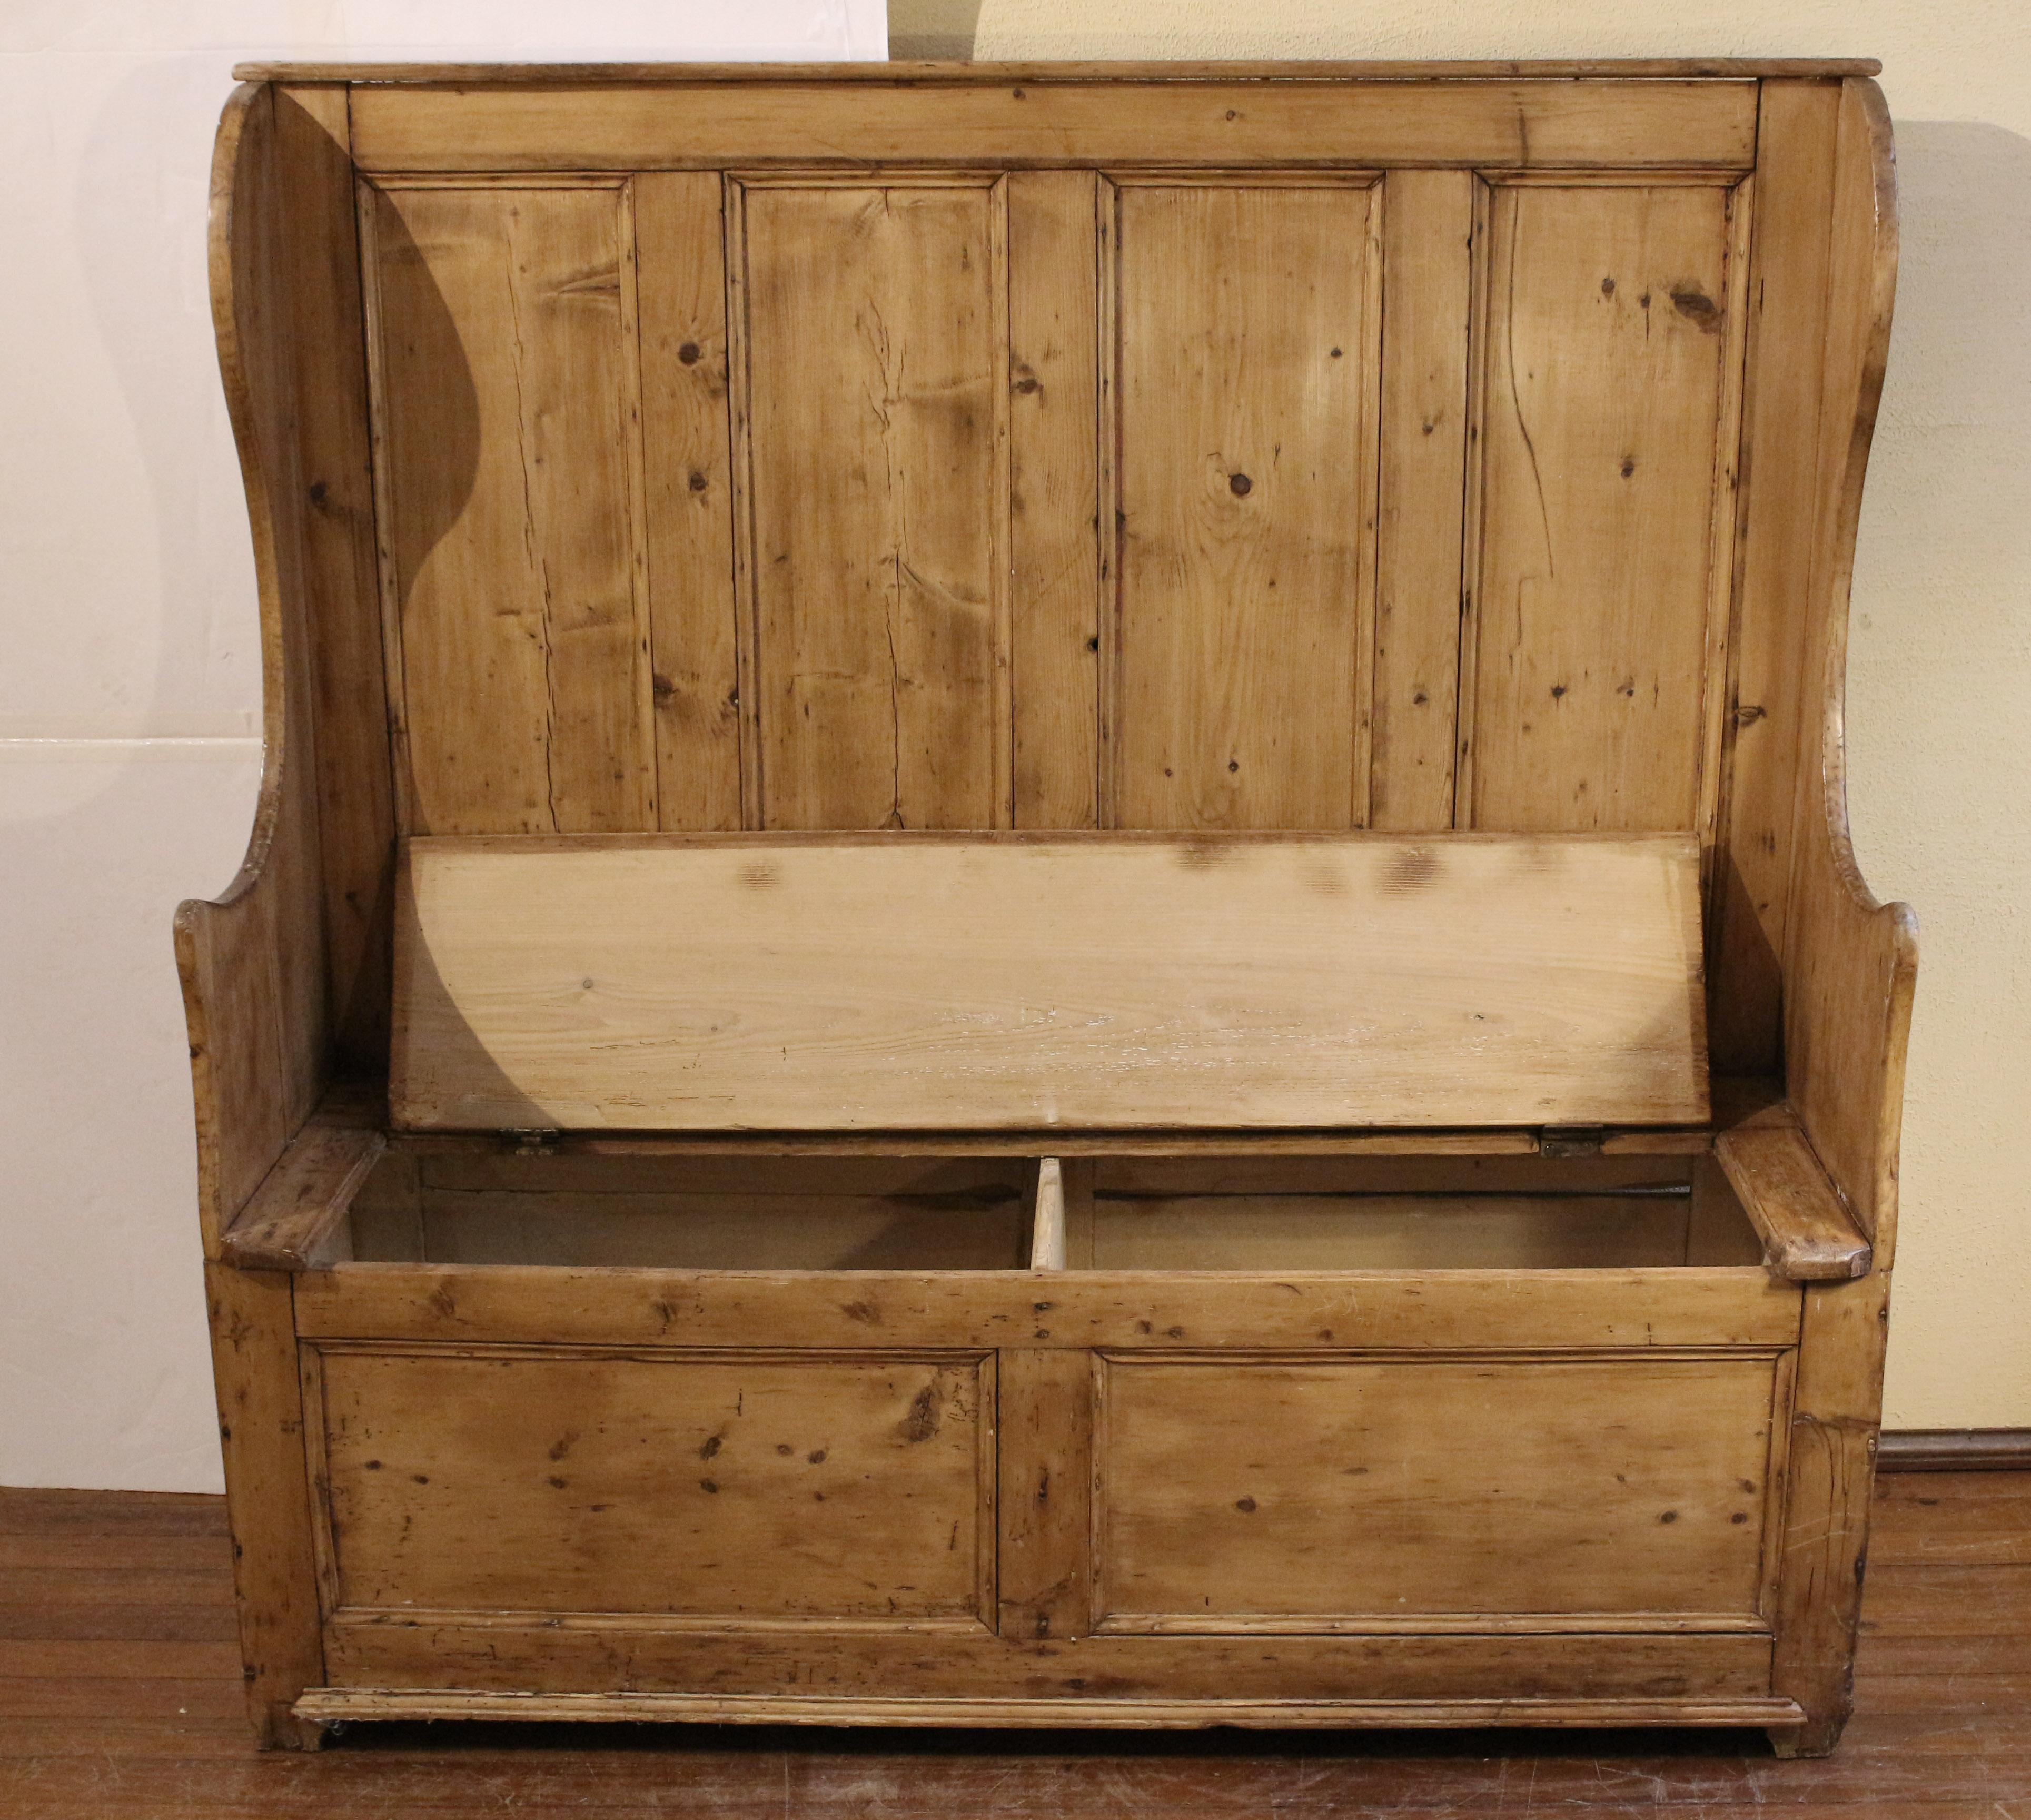 English panel-back winged settle, circa 1830-60, pine. A handsome example with blanket chest seat and the attractive fully paneled back allows use in all locations. The sculpted wings sweep down to create comfortable arm rests. In winter, these